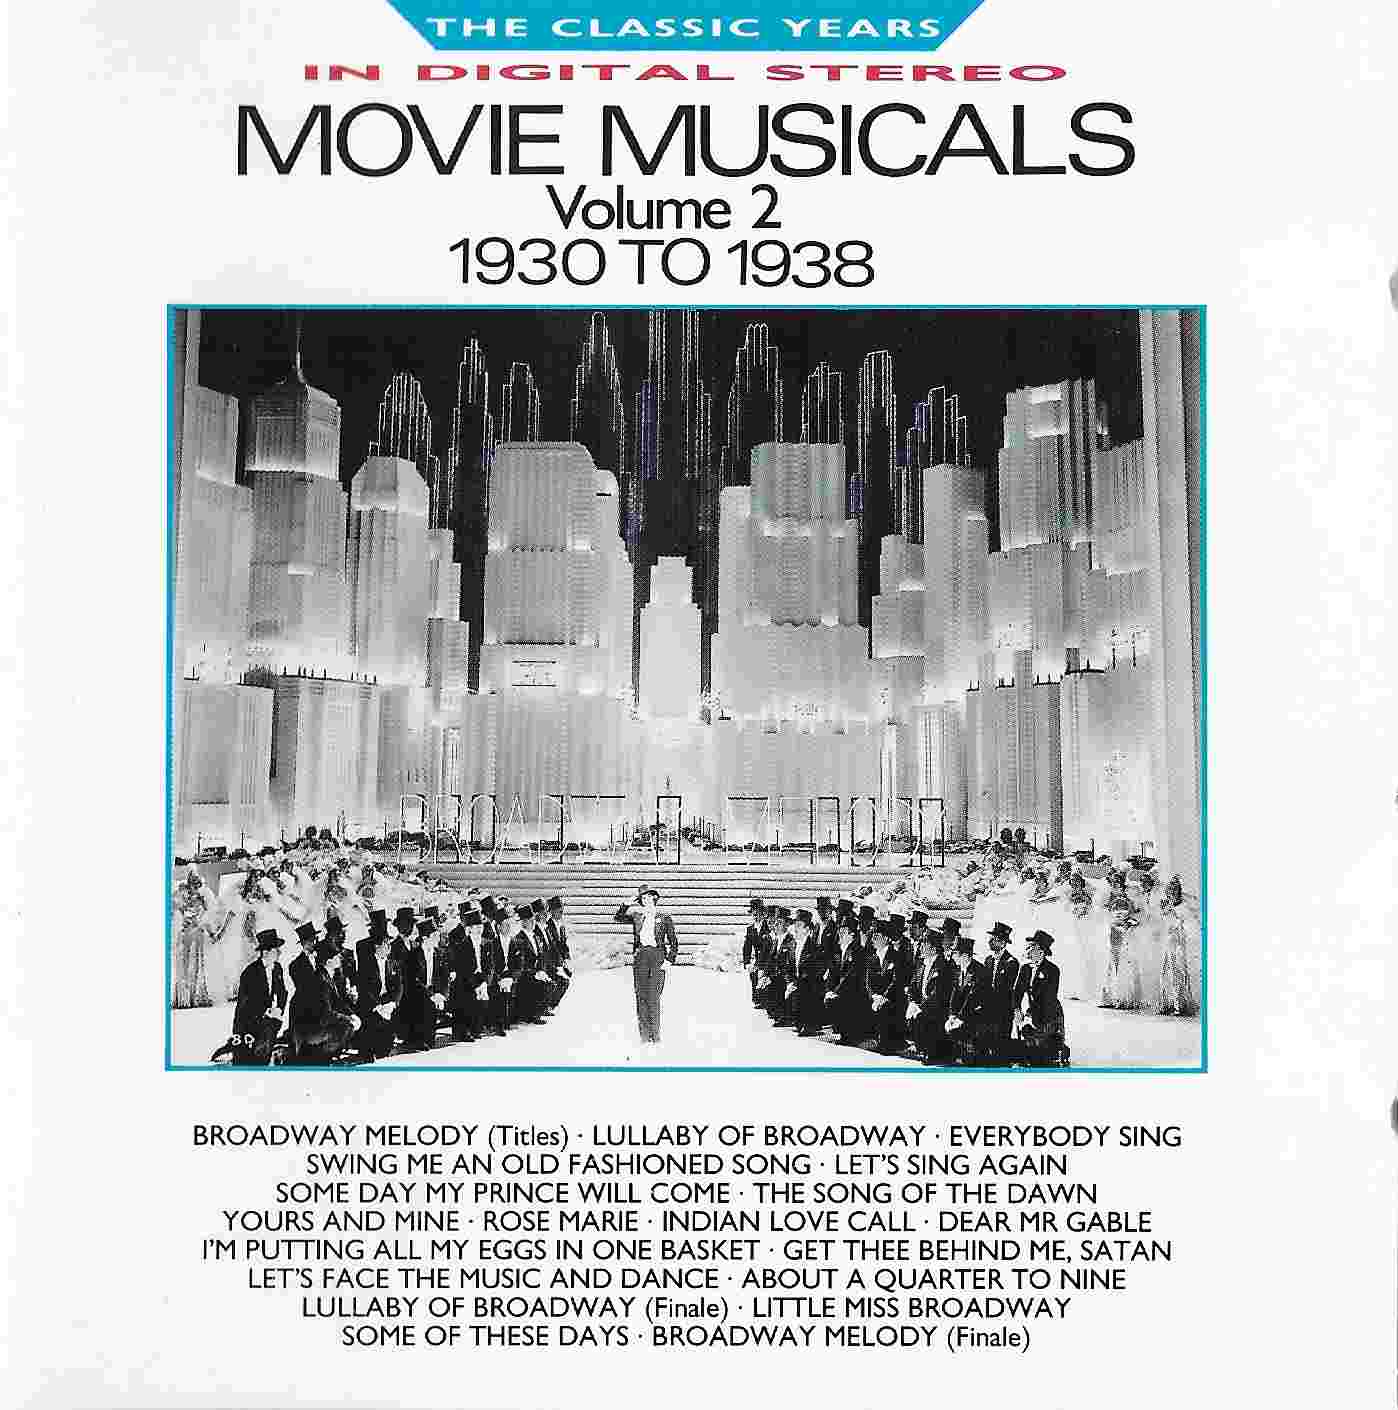 Picture of BBCCD767 Classic years - Movie musicals 1930 - 1938 by artist Various from the BBC cds - Records and Tapes library